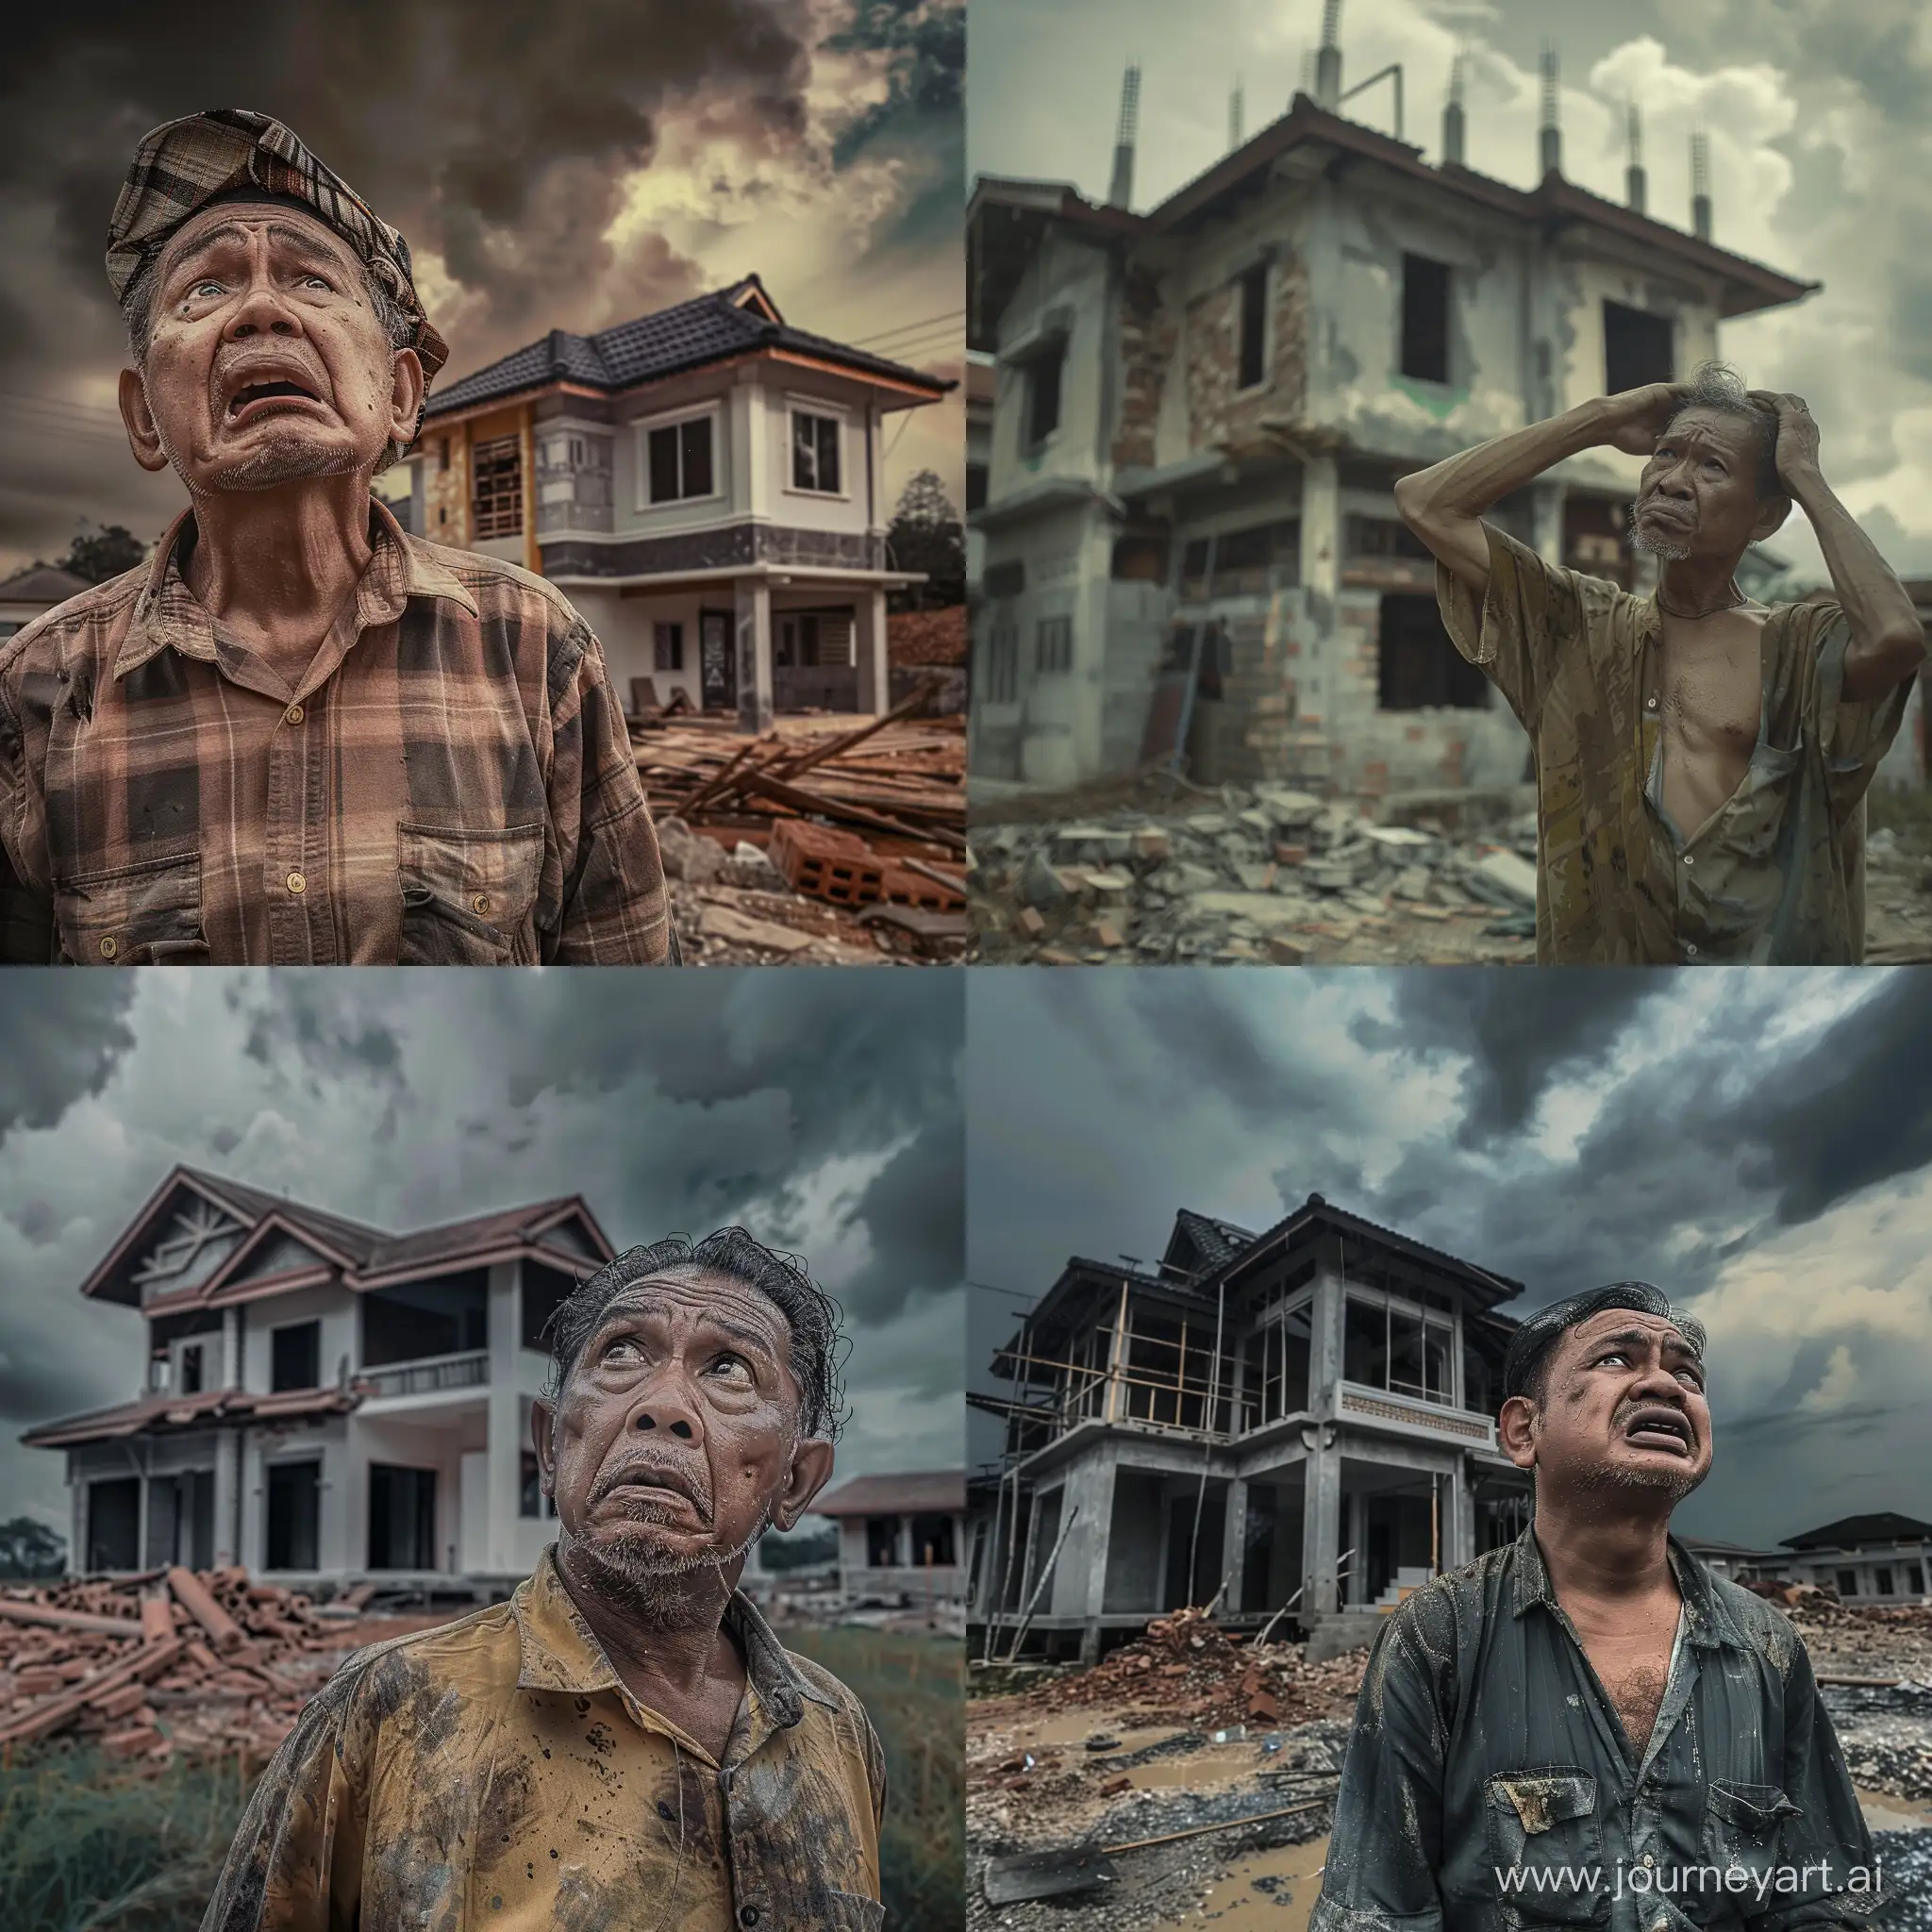 Malay-Contractor-Inspecting-Unfinished-House-Upset-Homeowner-Scene